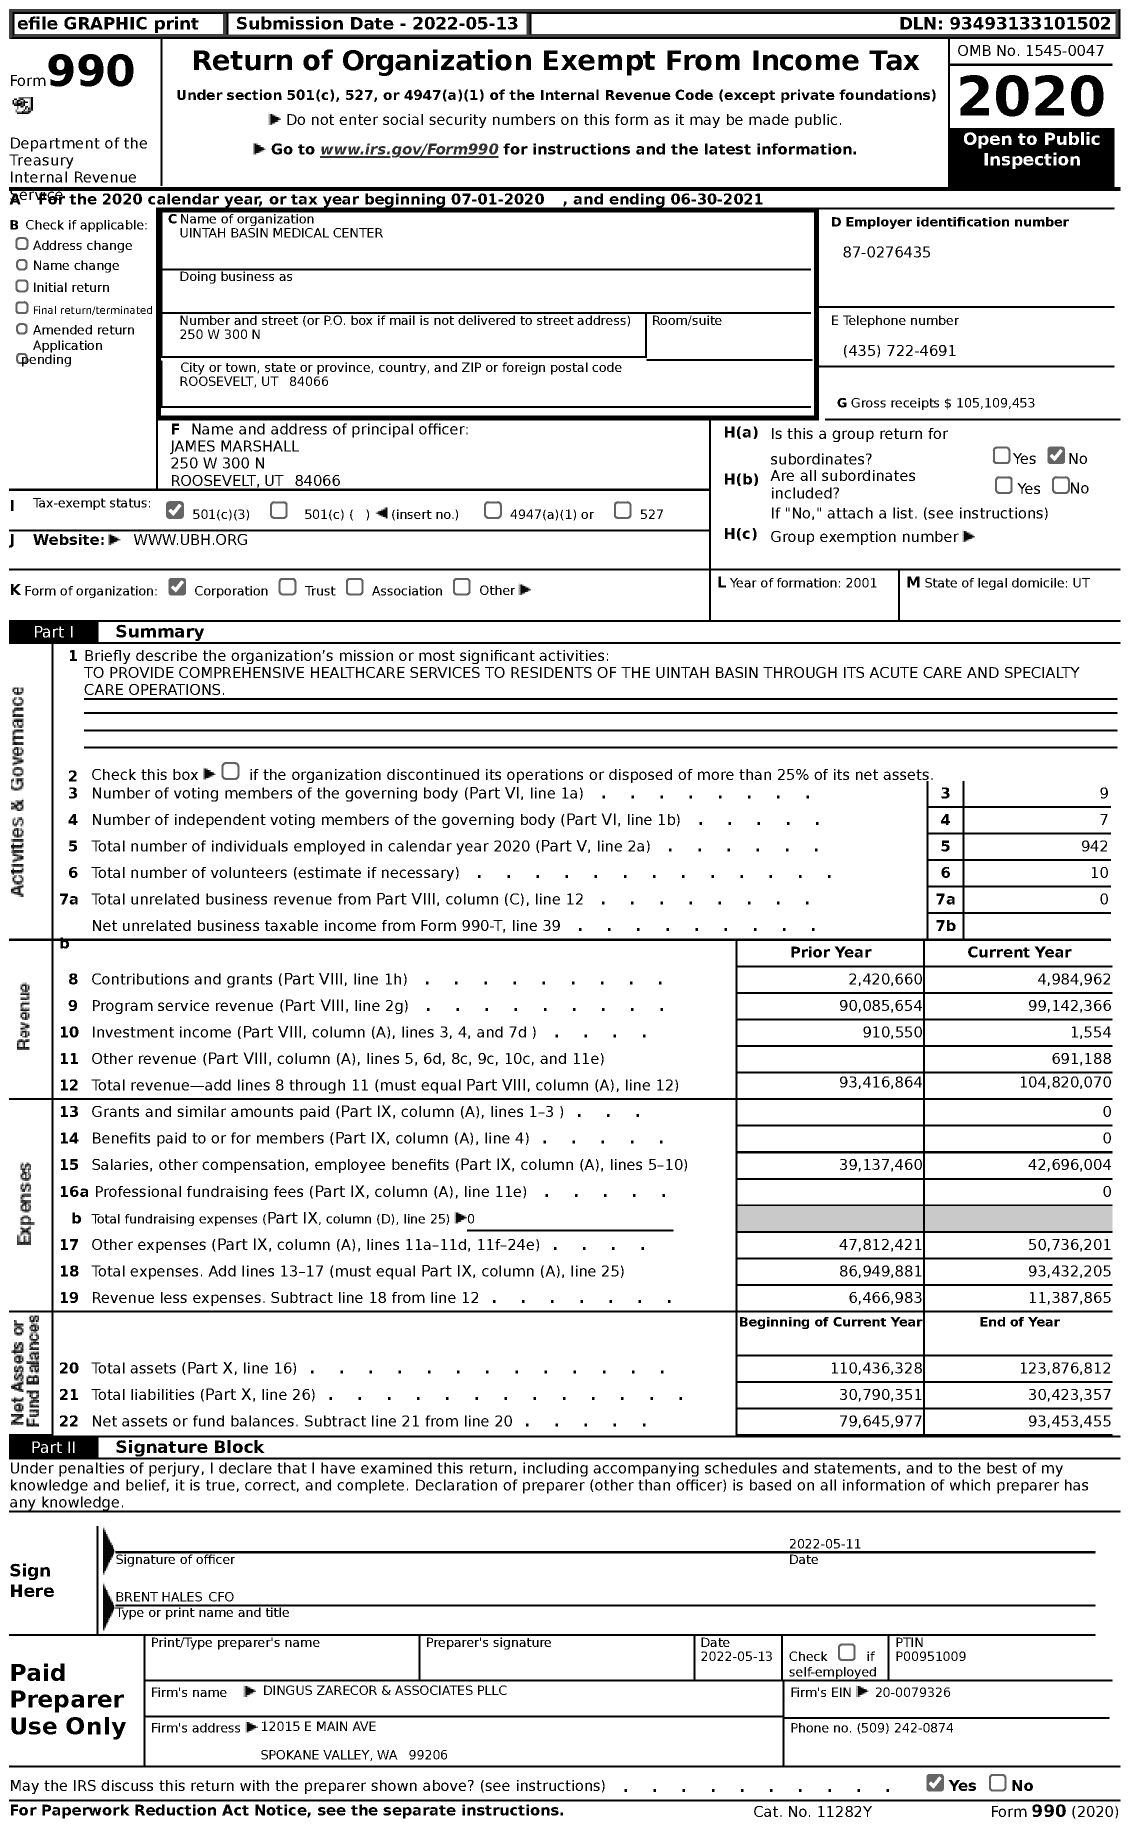 Image of first page of 2020 Form 990 for Uintah Basin Medical Center (UBMC)